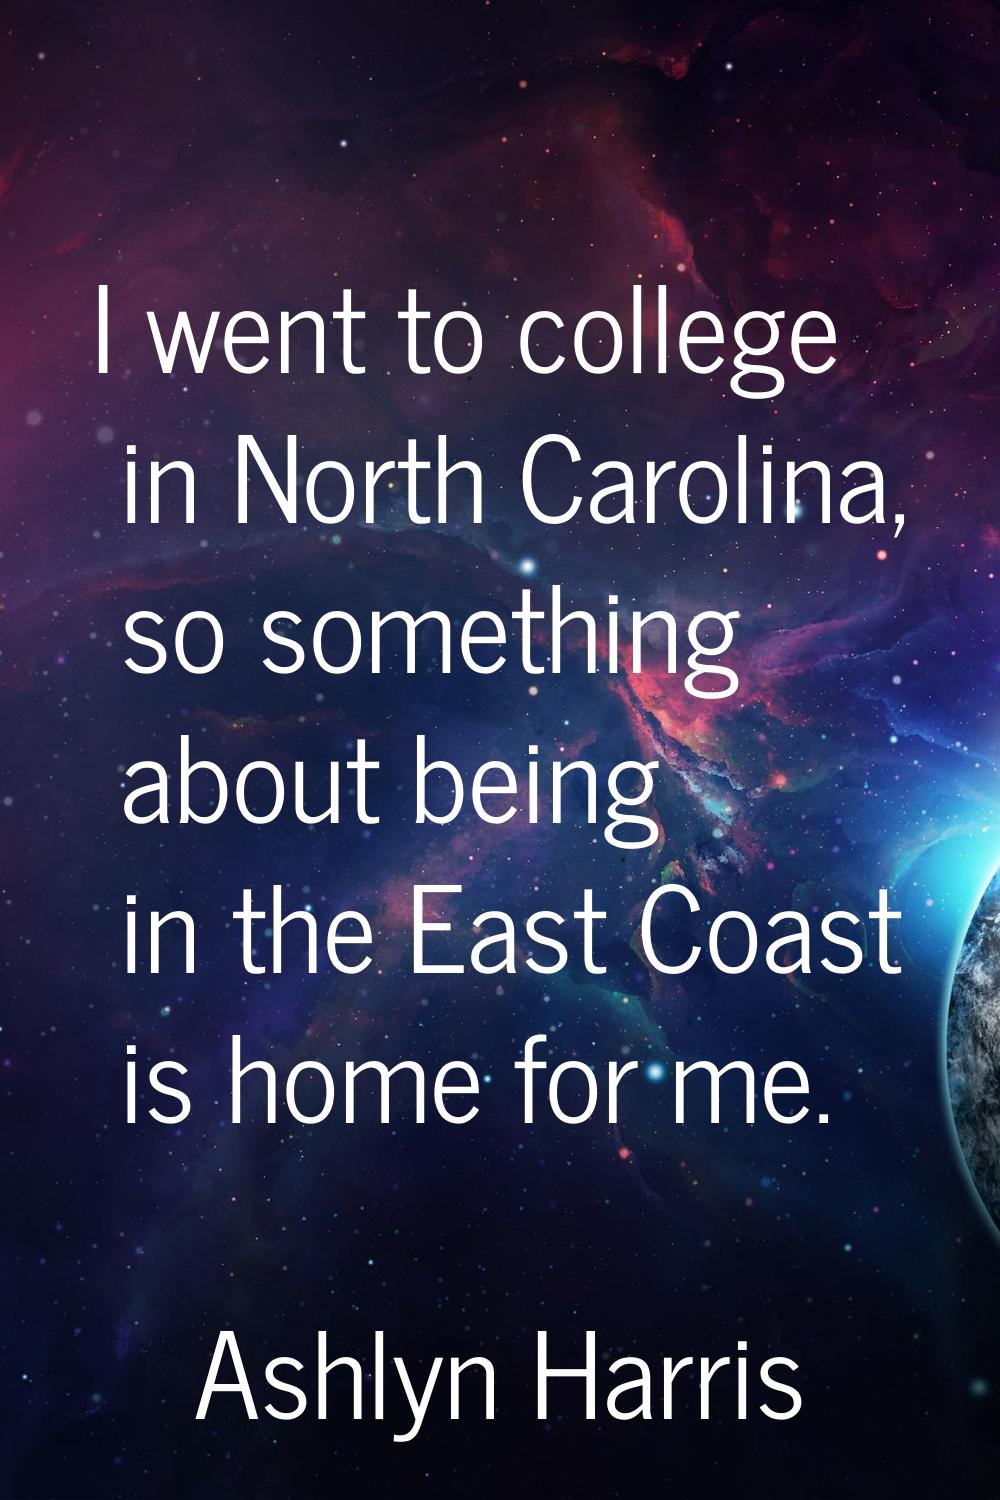 I went to college in North Carolina, so something about being in the East Coast is home for me.